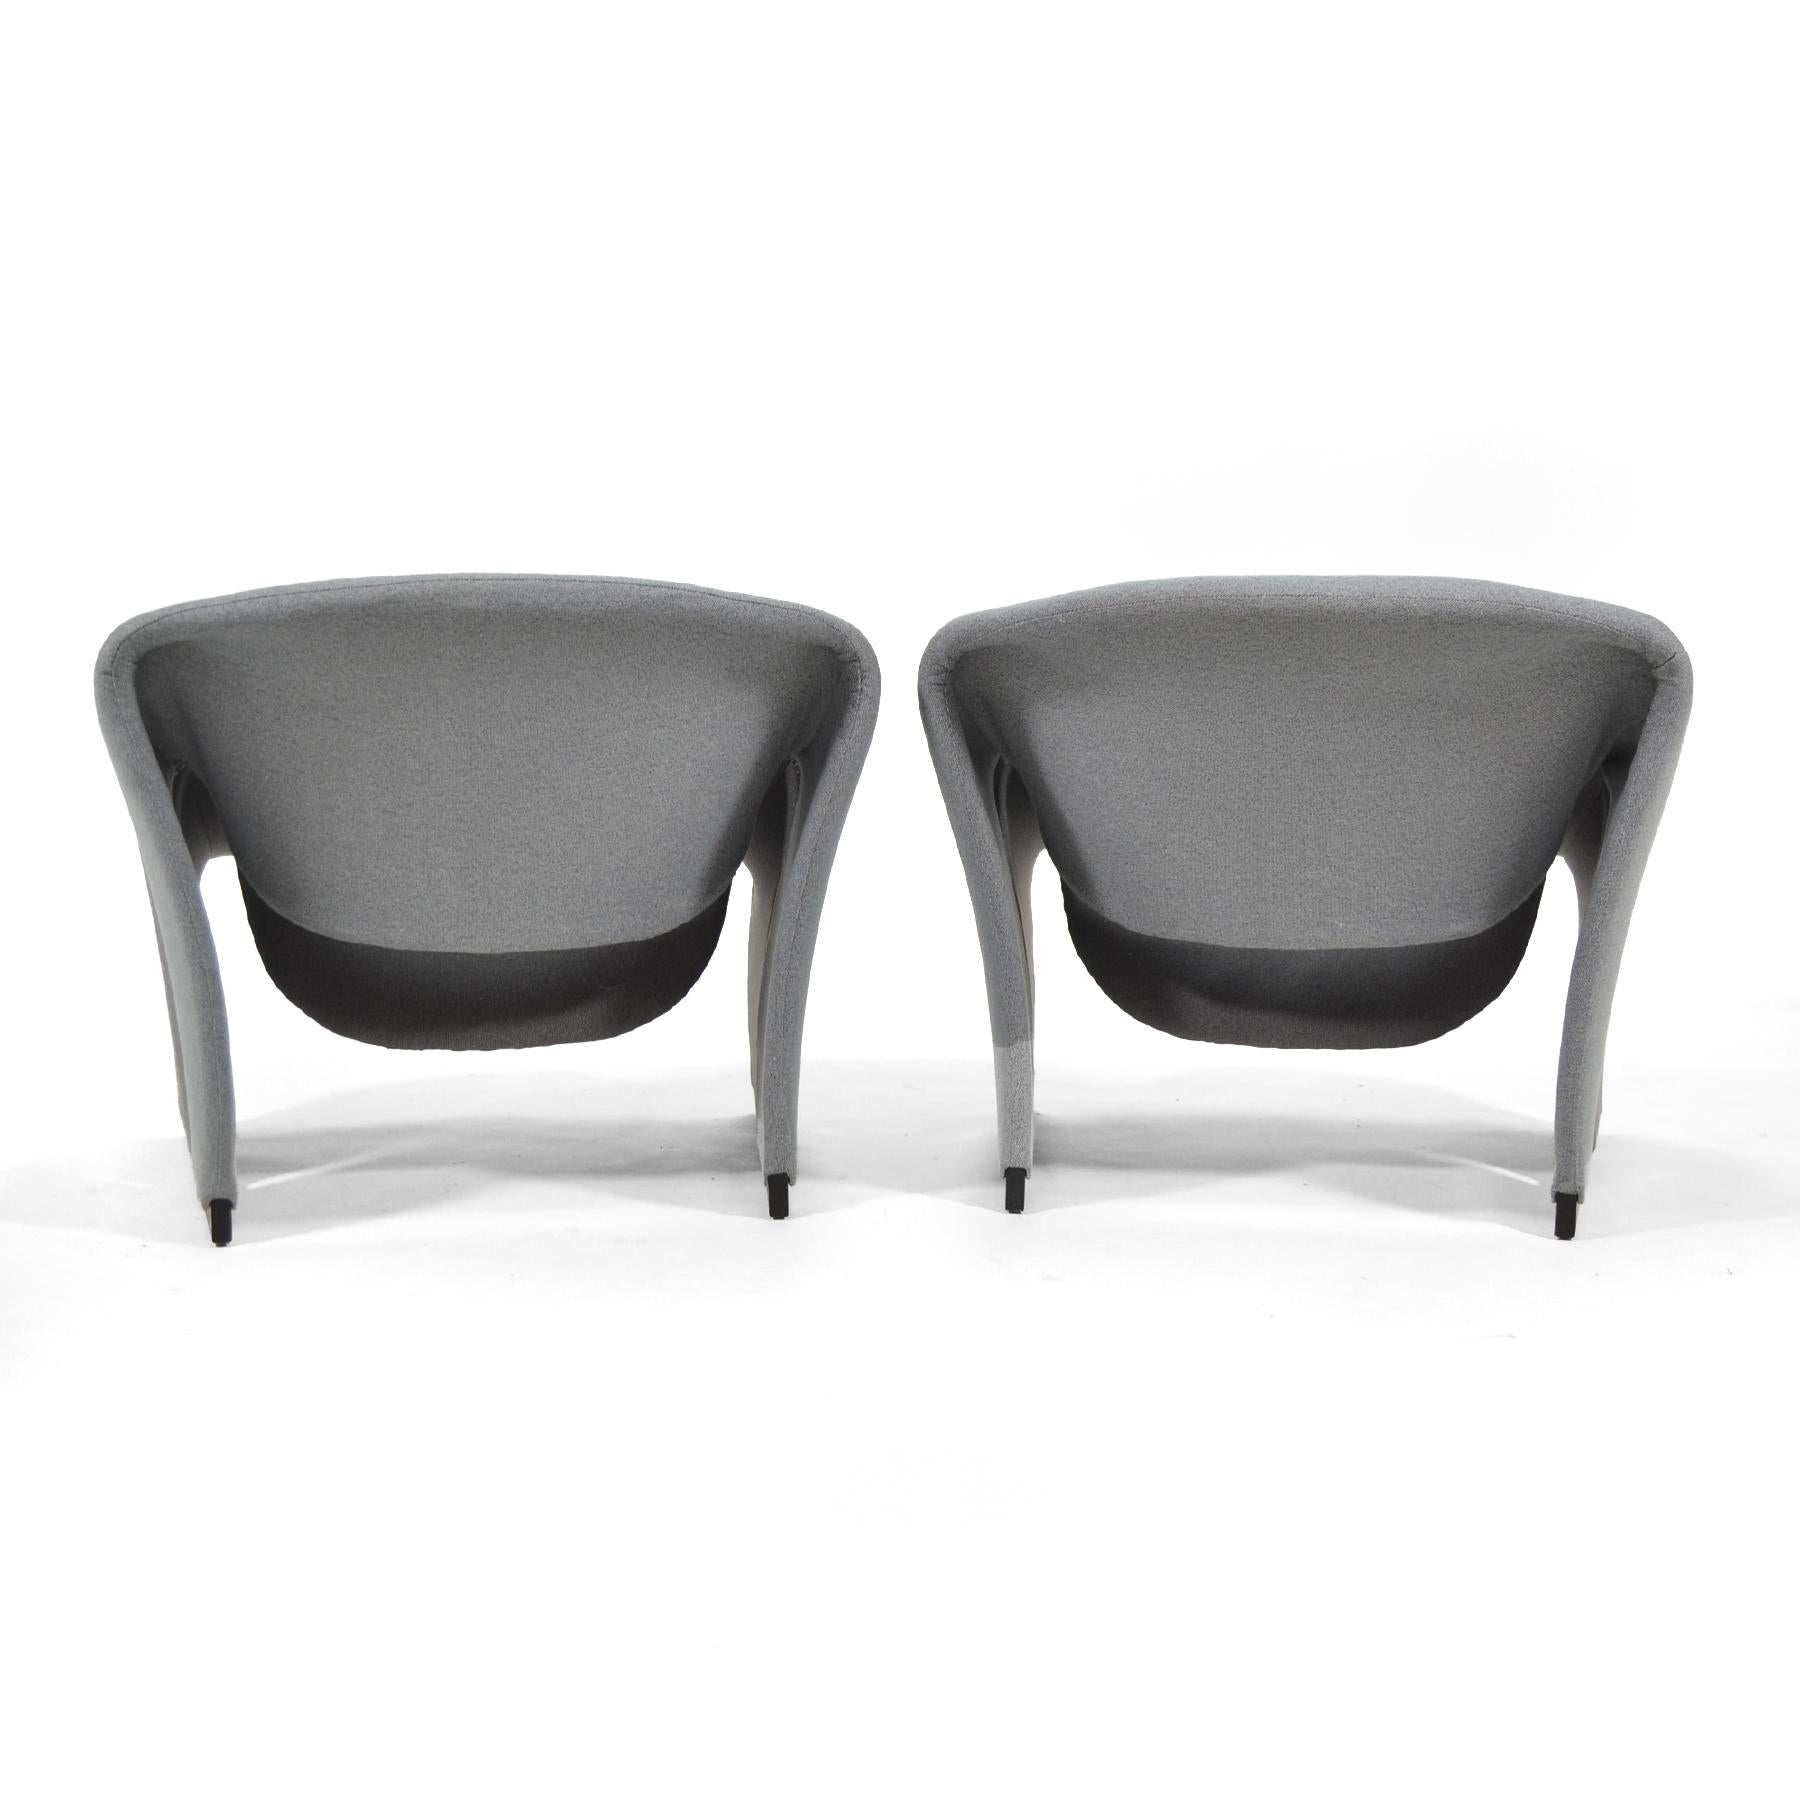 Mid-20th Century Pair of Pierre Paulin Model F580 Lounge Chairs by Artifort